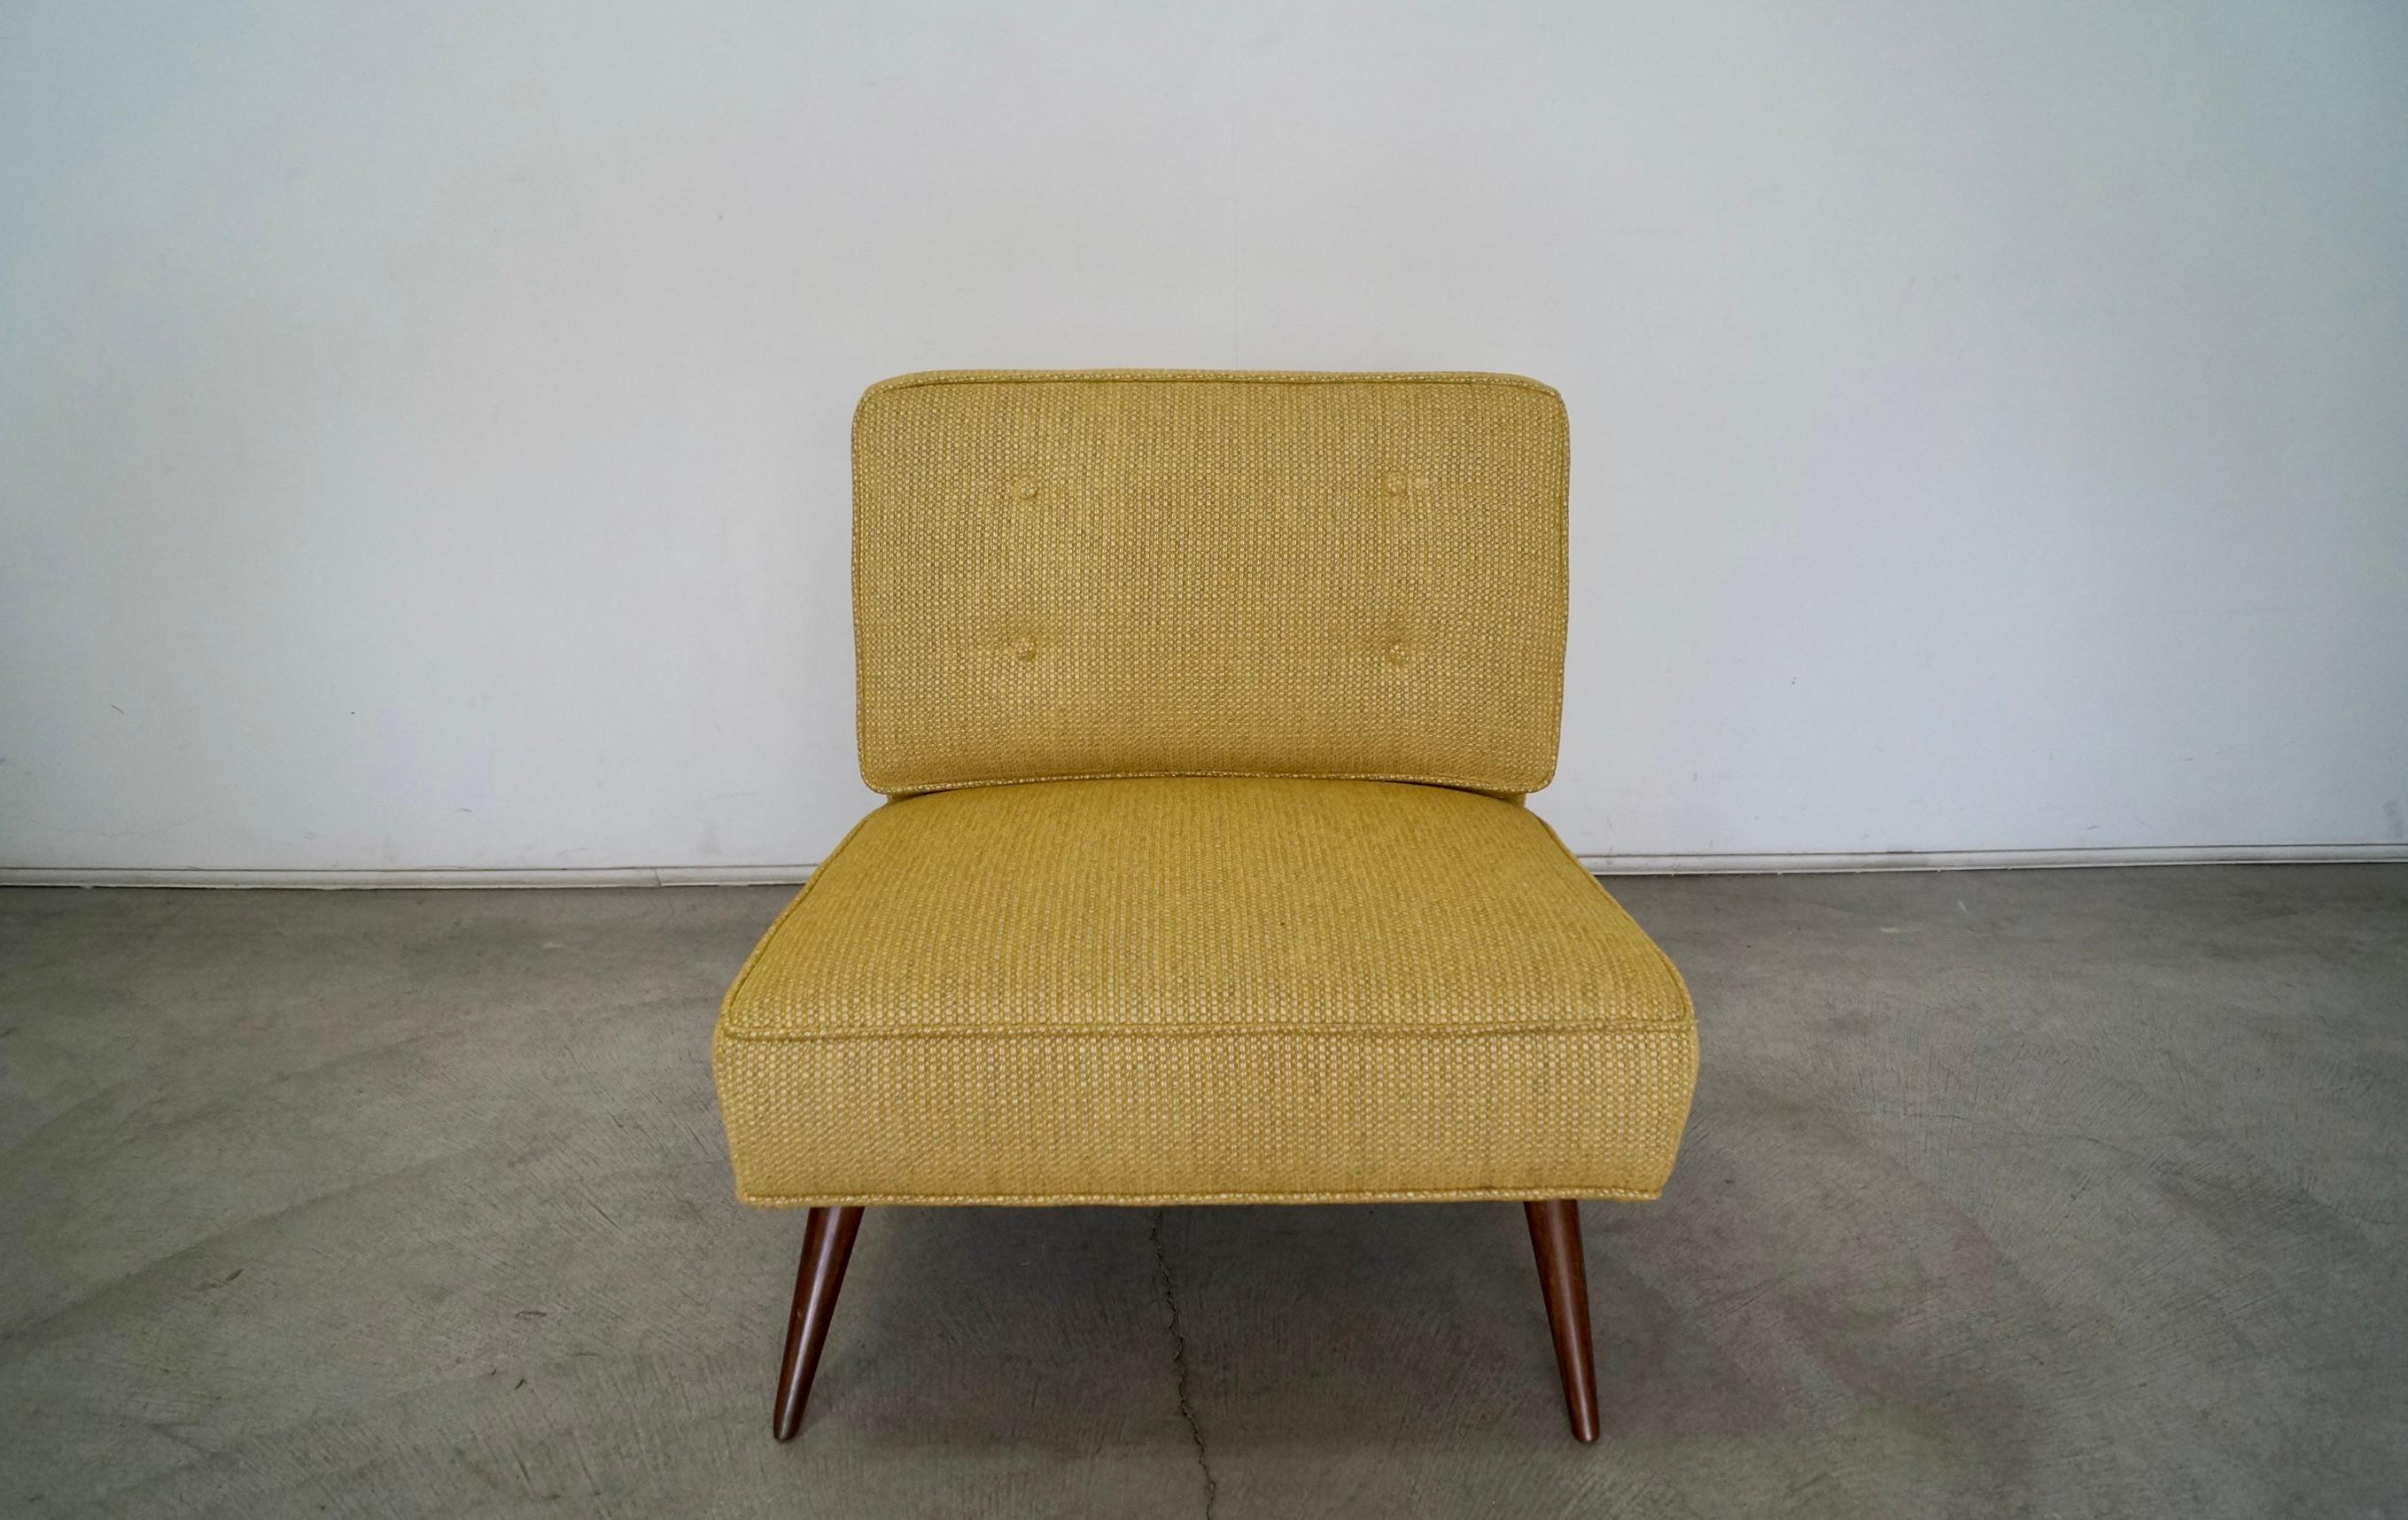 1950s Mid-Century Modern Lounge Chair In Excellent Condition For Sale In Burbank, CA